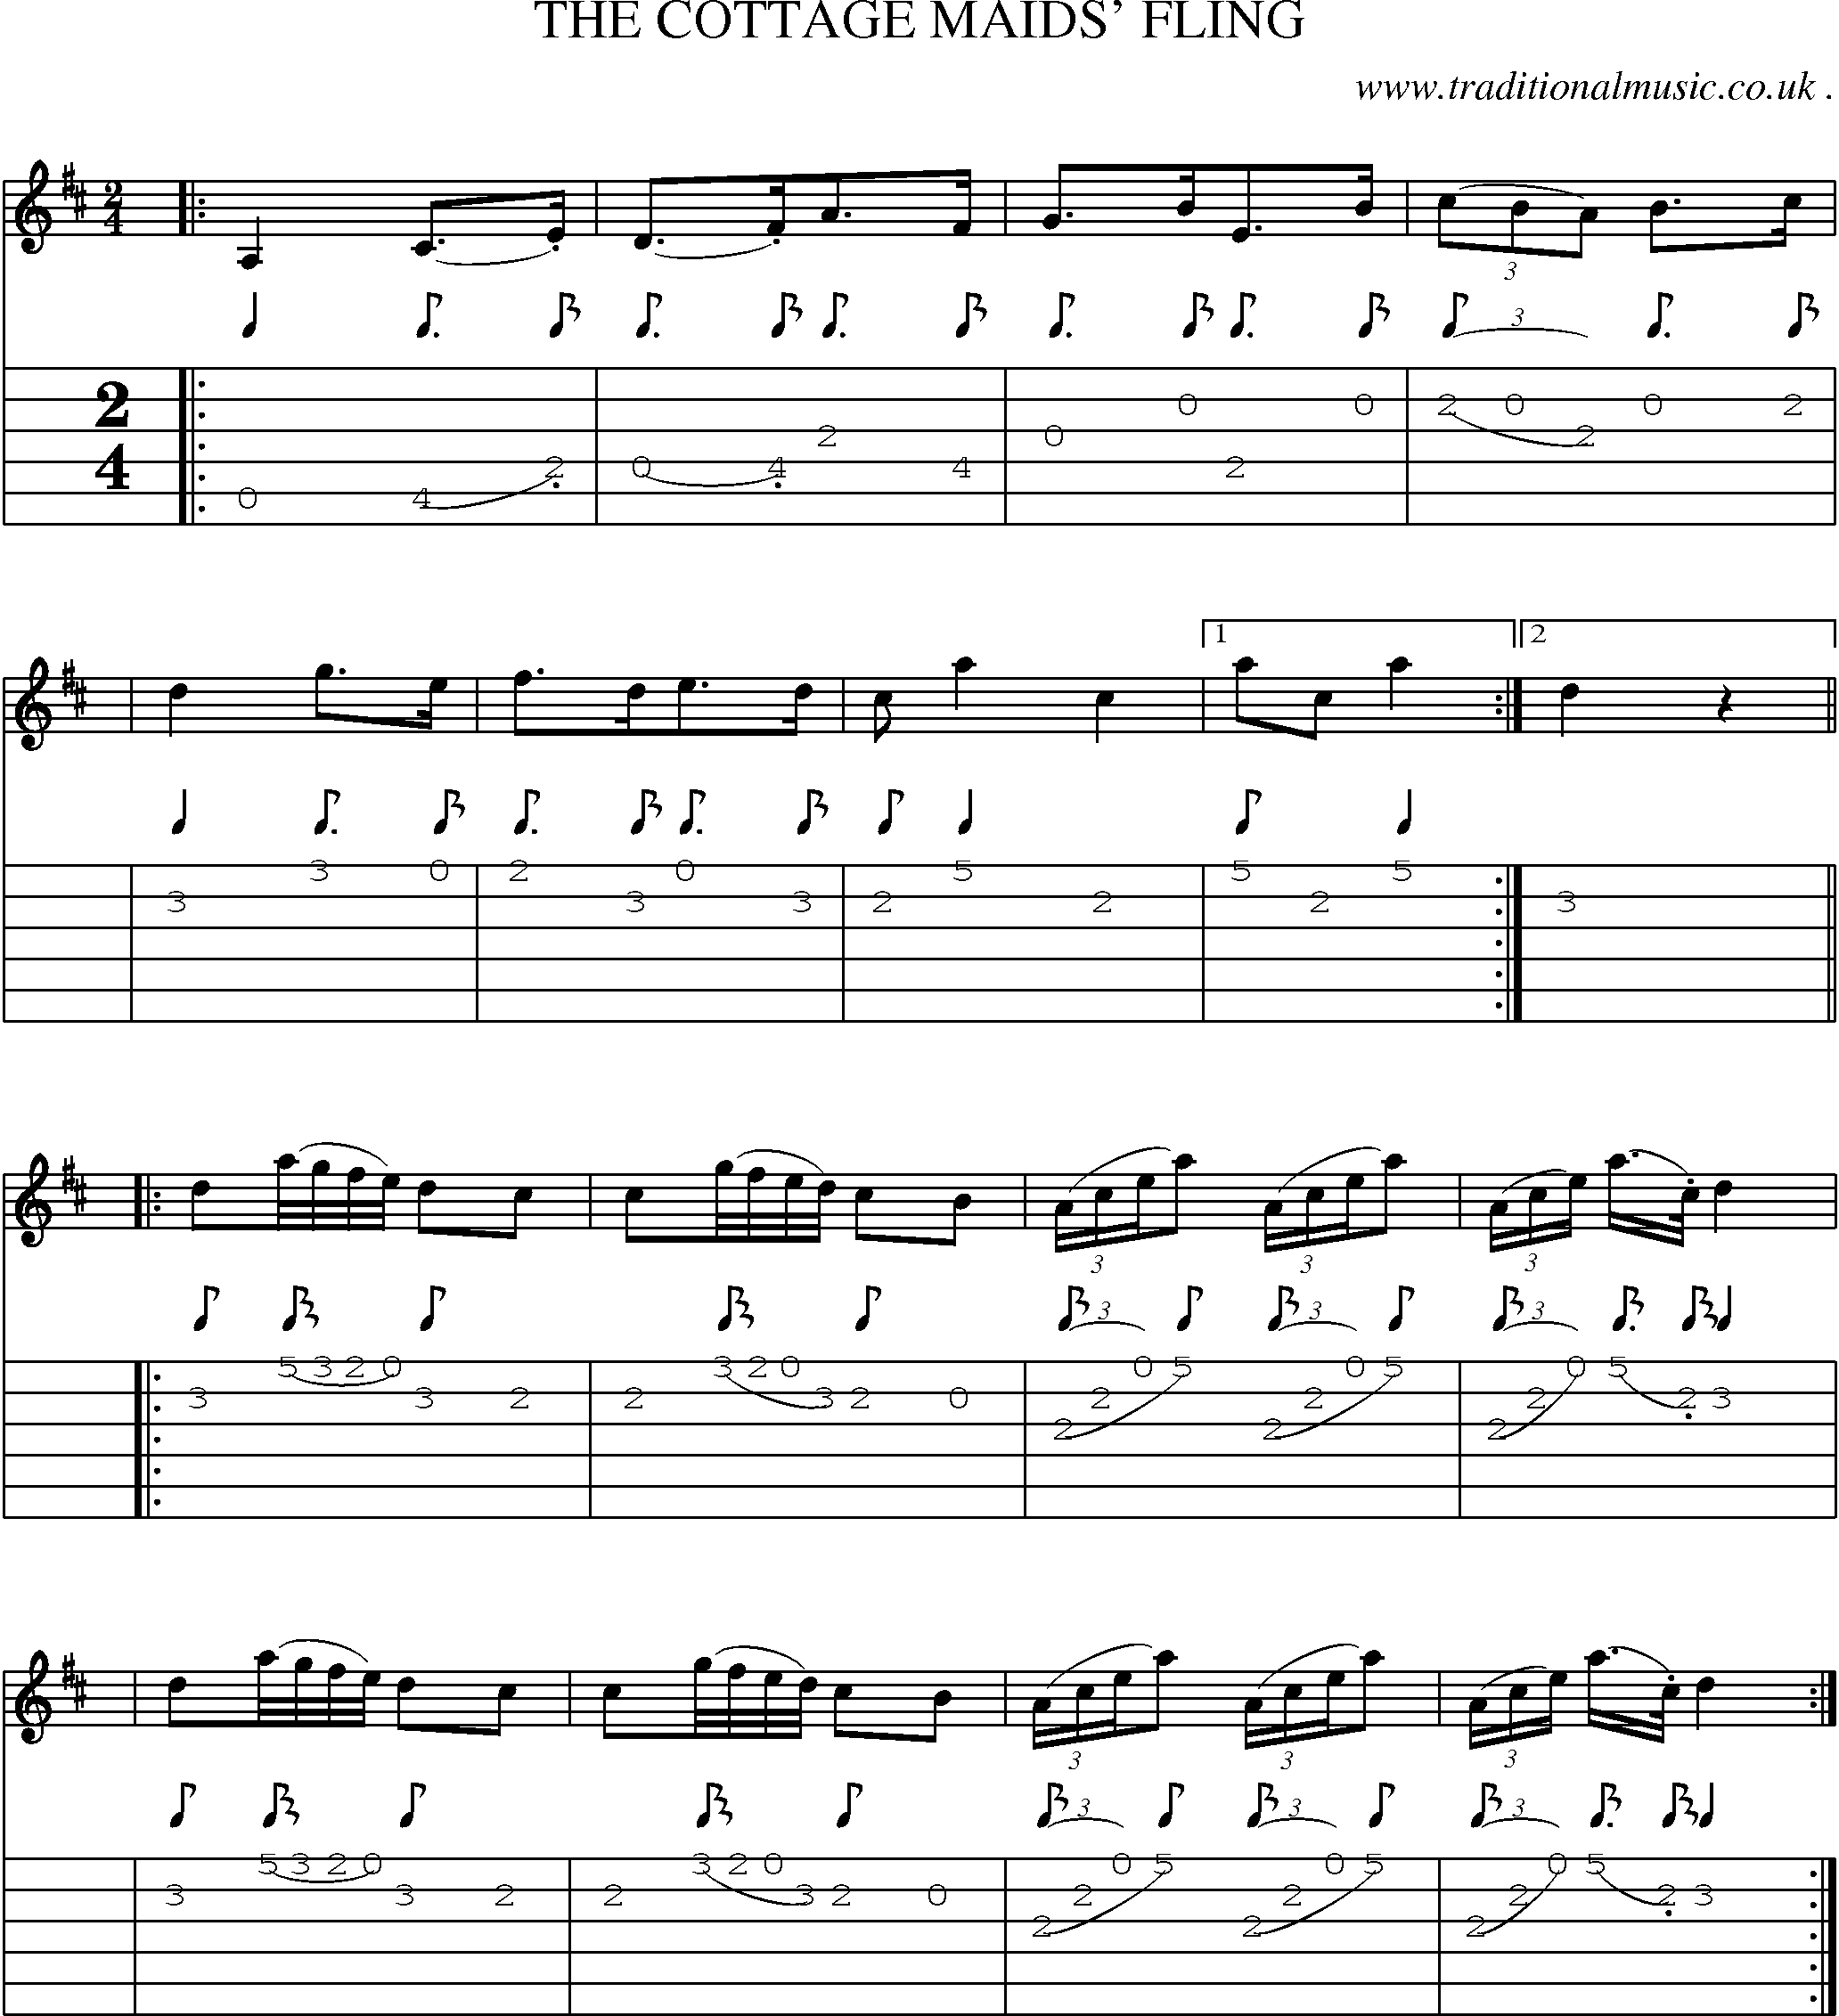 Sheet-Music and Guitar Tabs for The Cottage Maids Fling